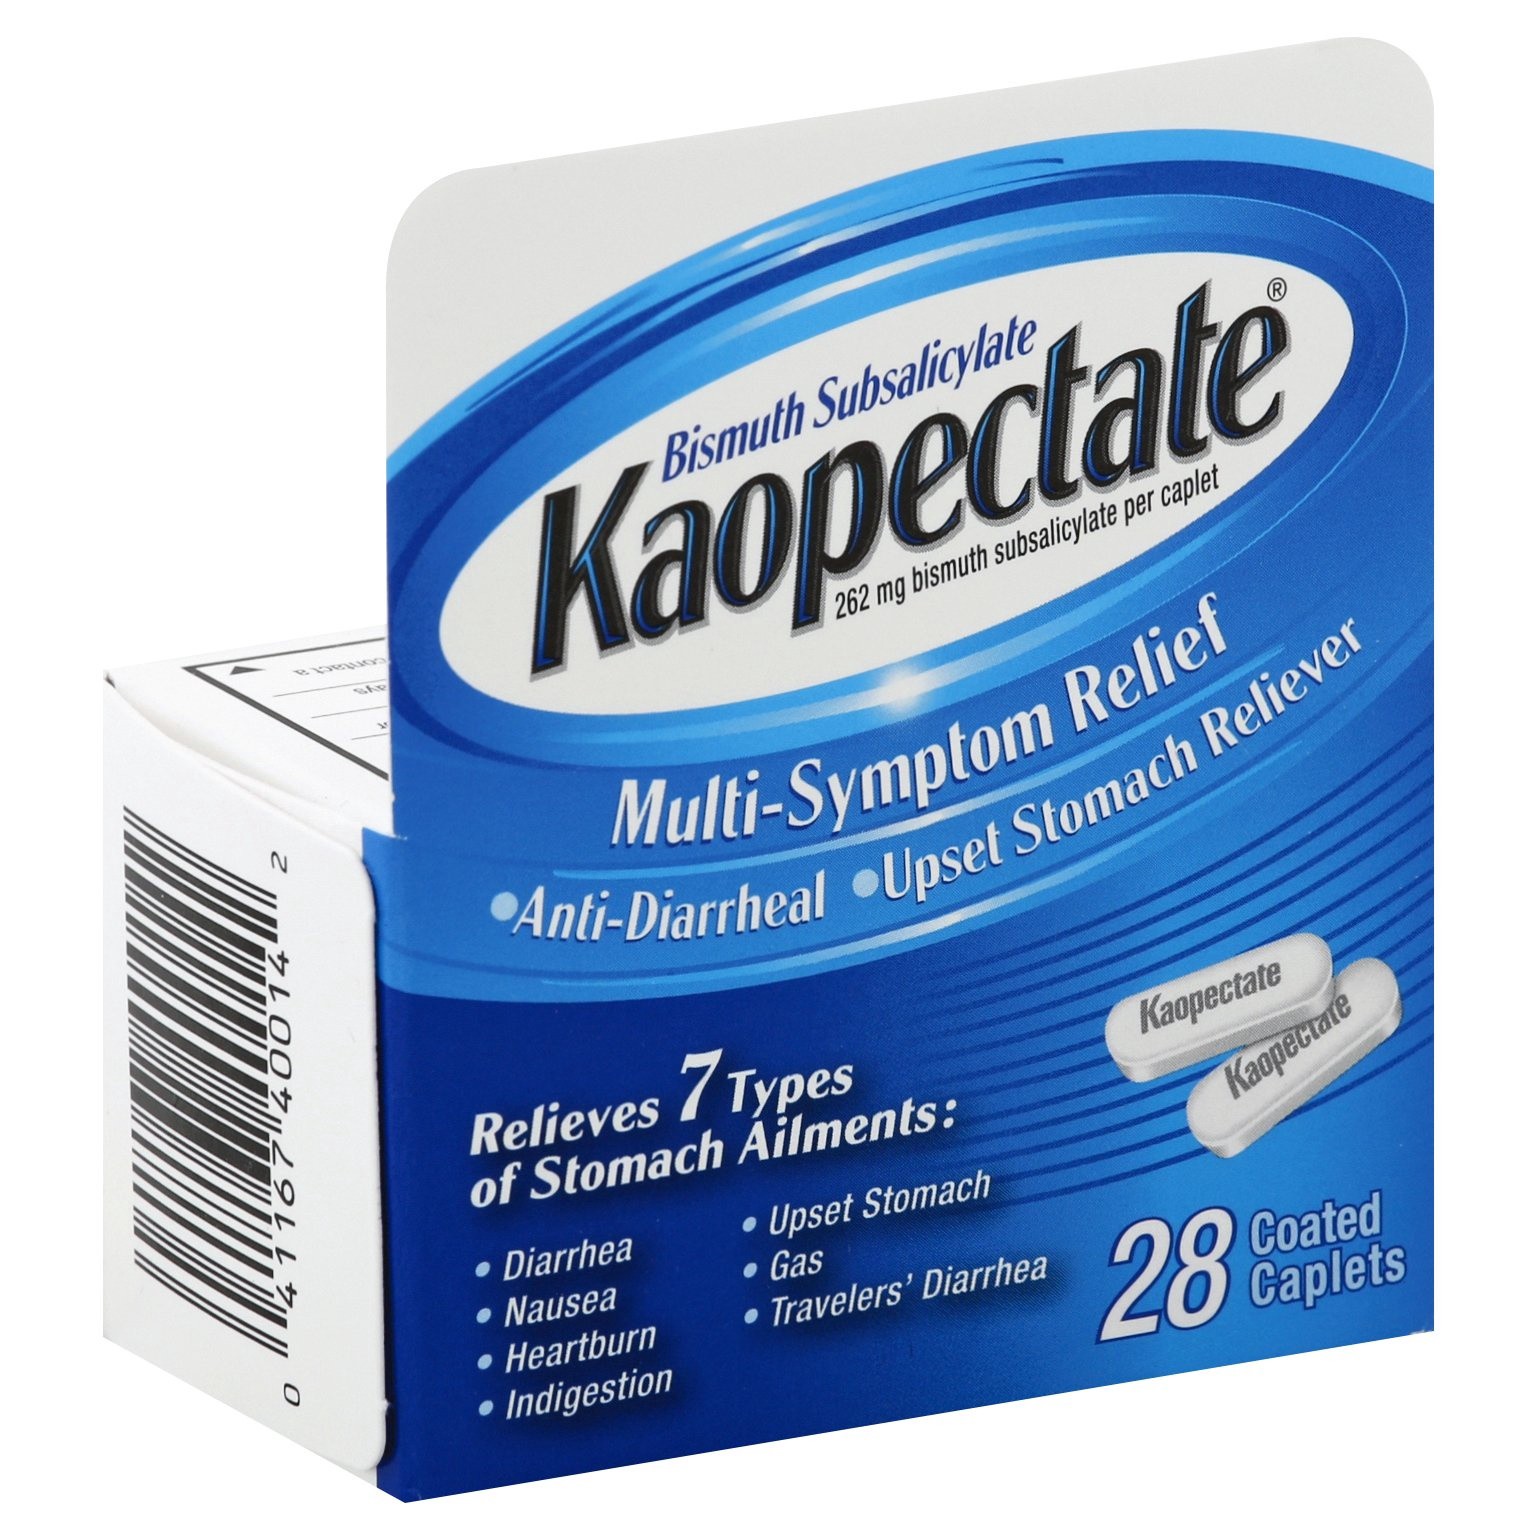 slide 1 of 7, Kaopectate Anti-Diarrheal/Upset Stomach Reliever 262 mg Multi-Symptom Relief Coated Caplets, 28 ct